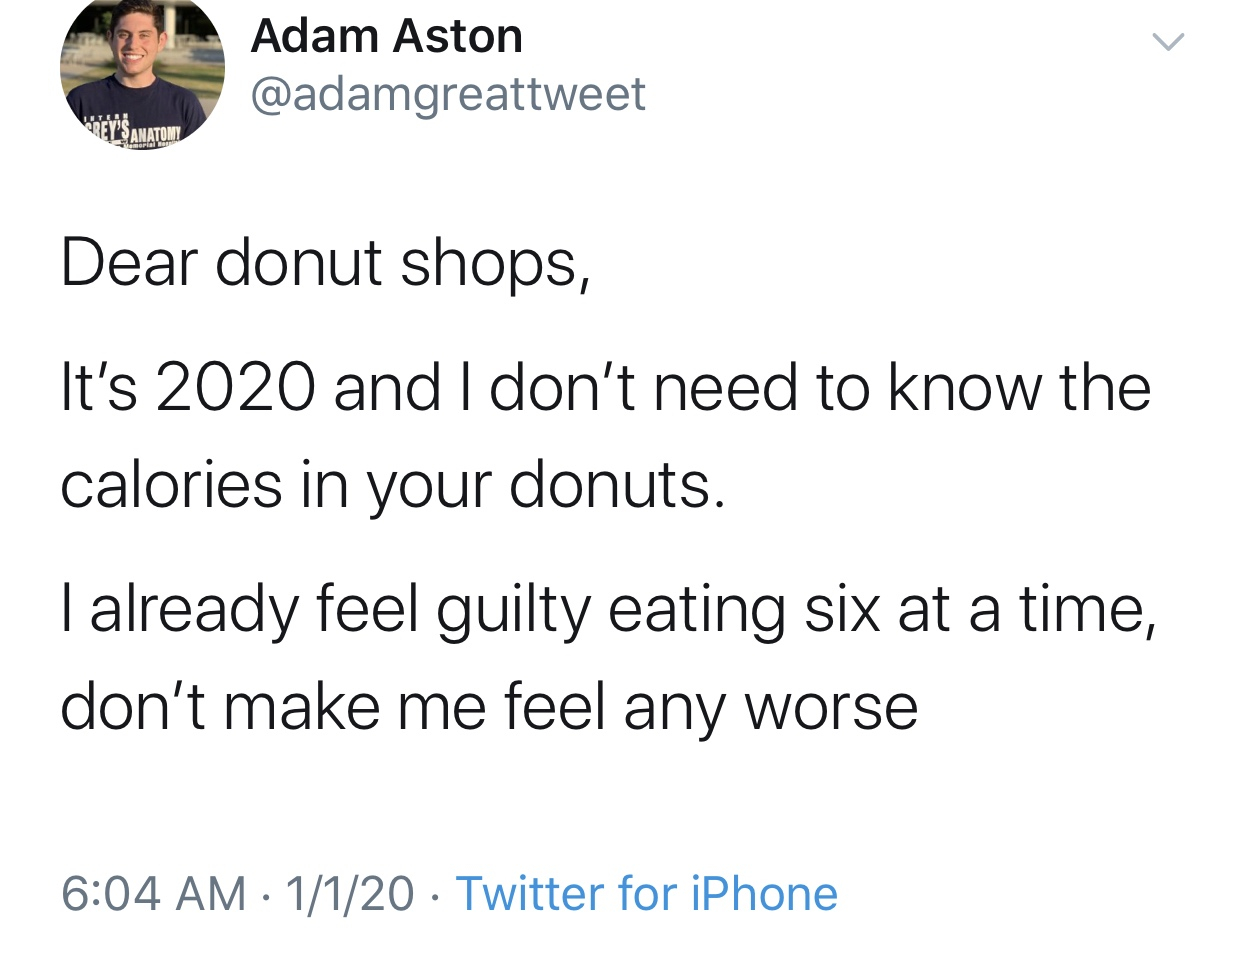 2020 memes - people who wear jeans meme - Adam Aston Vbrevsom Dear donut shops, It's 2020 and I don't need to know the calories in your donuts. I already feel guilty eating six at a time, don't make me feel any worse 1120 Twitter for iPhone